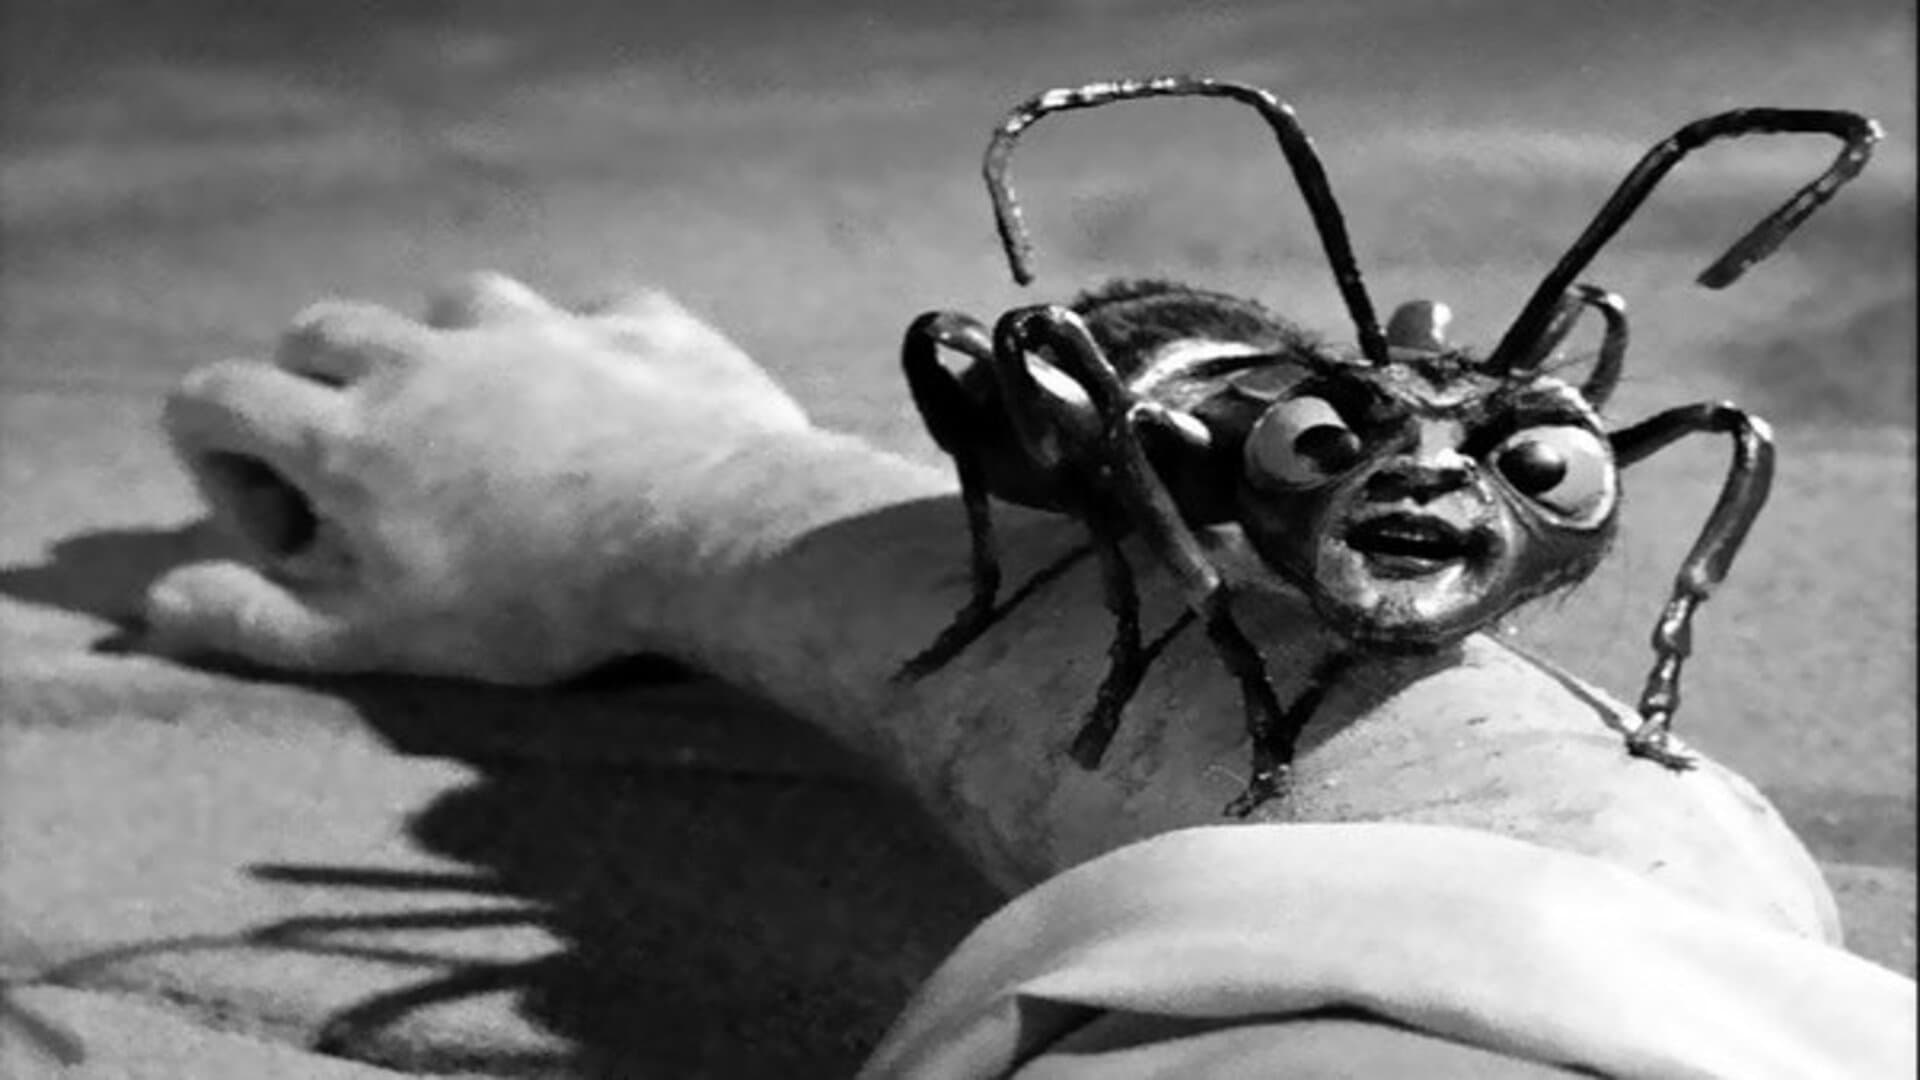 The Outer Limits - Season 2 Episode 14